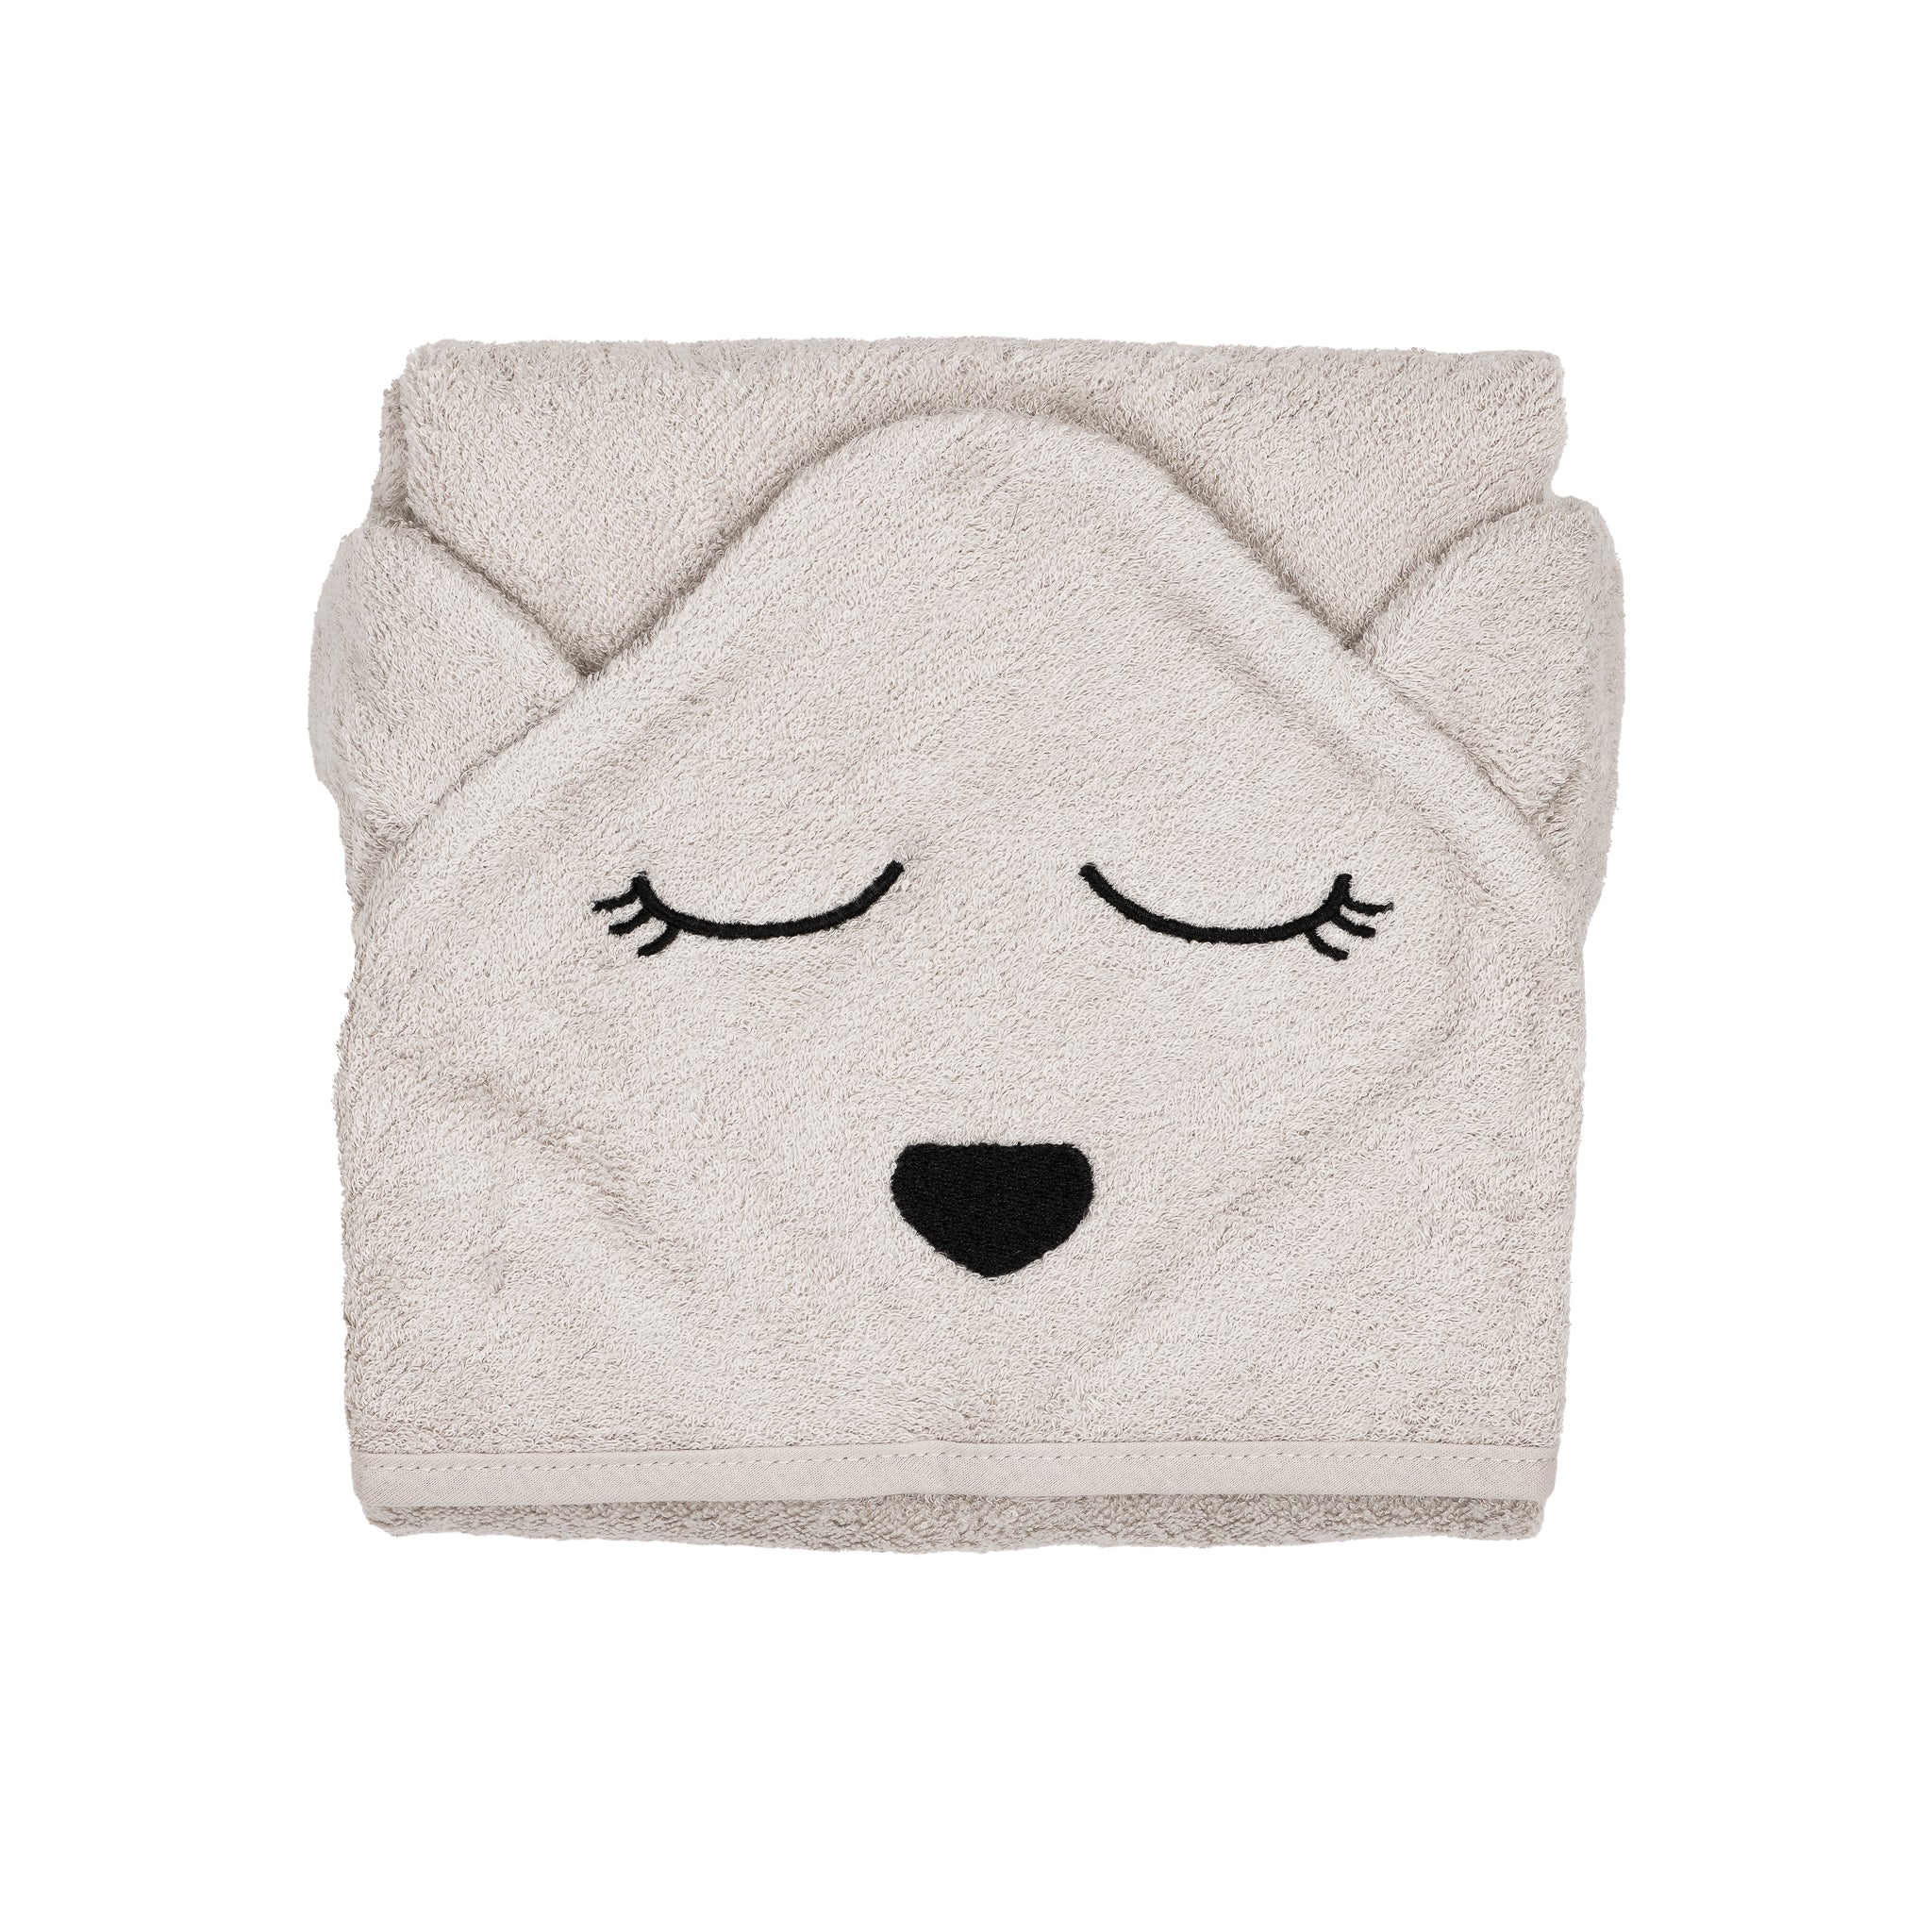 hooded towel for baby and toddler